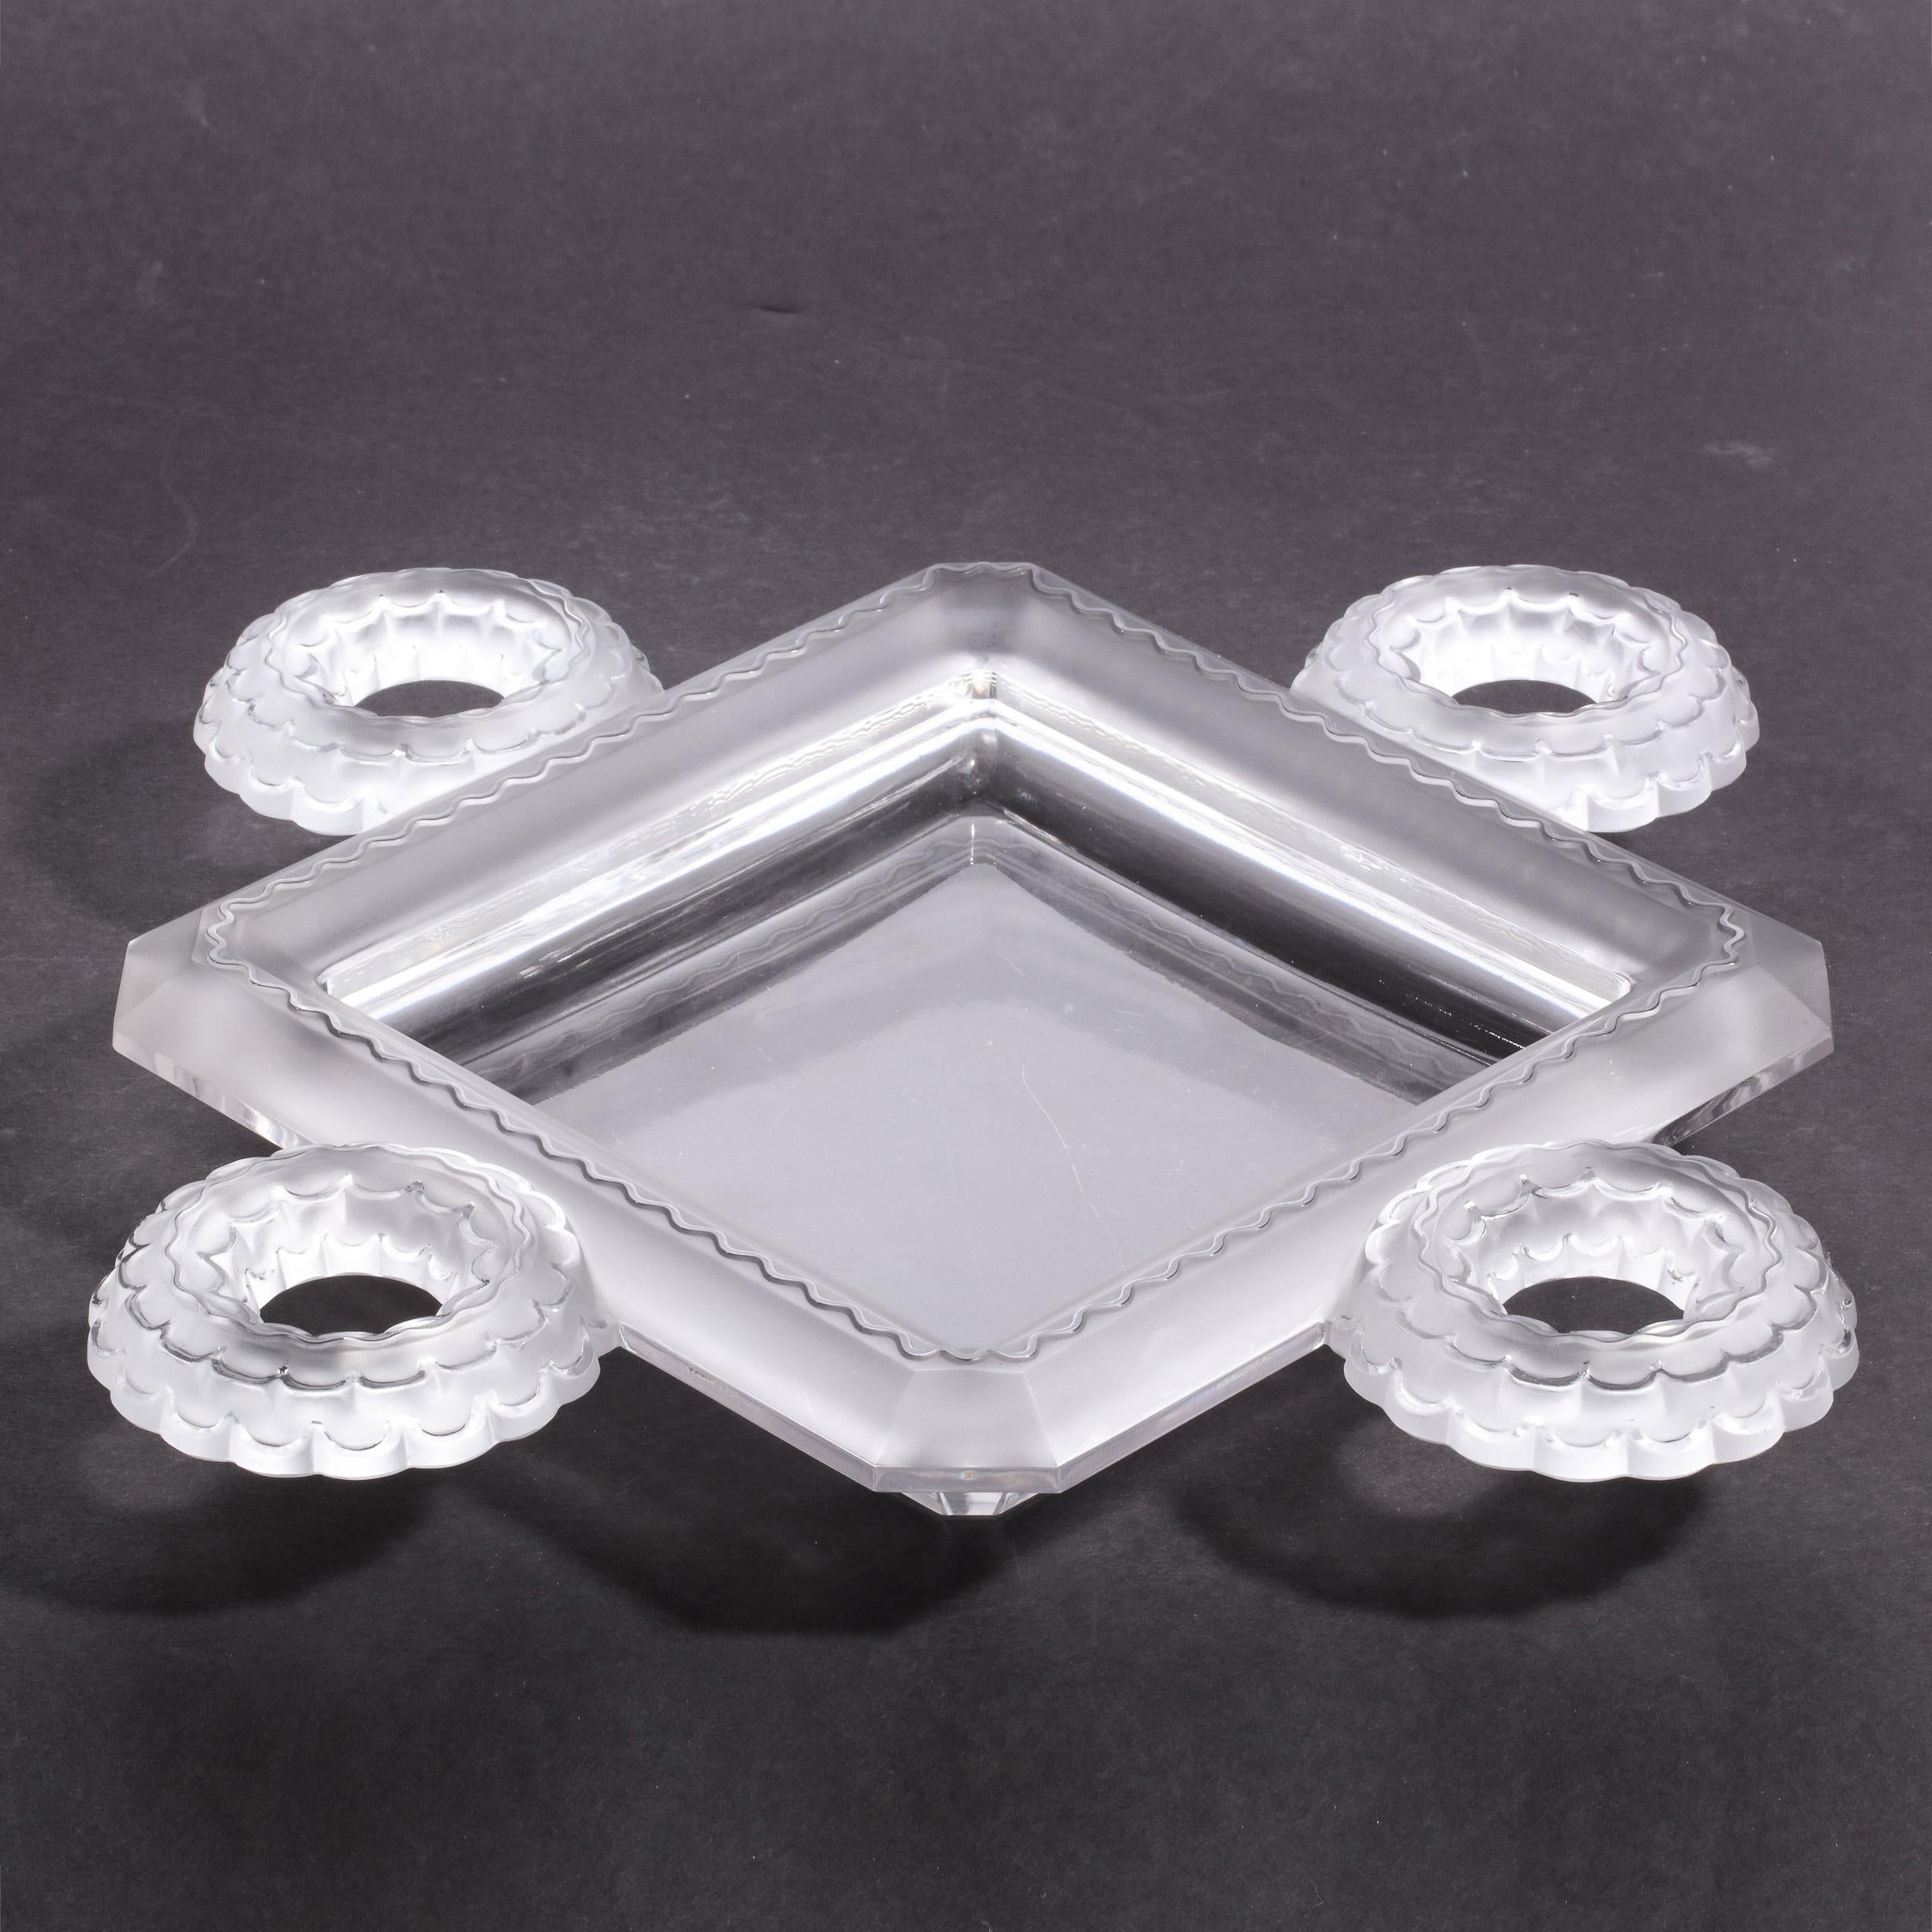 French Modernist Frosted & Translucent Crystal Decorative Tray by Lalique 3